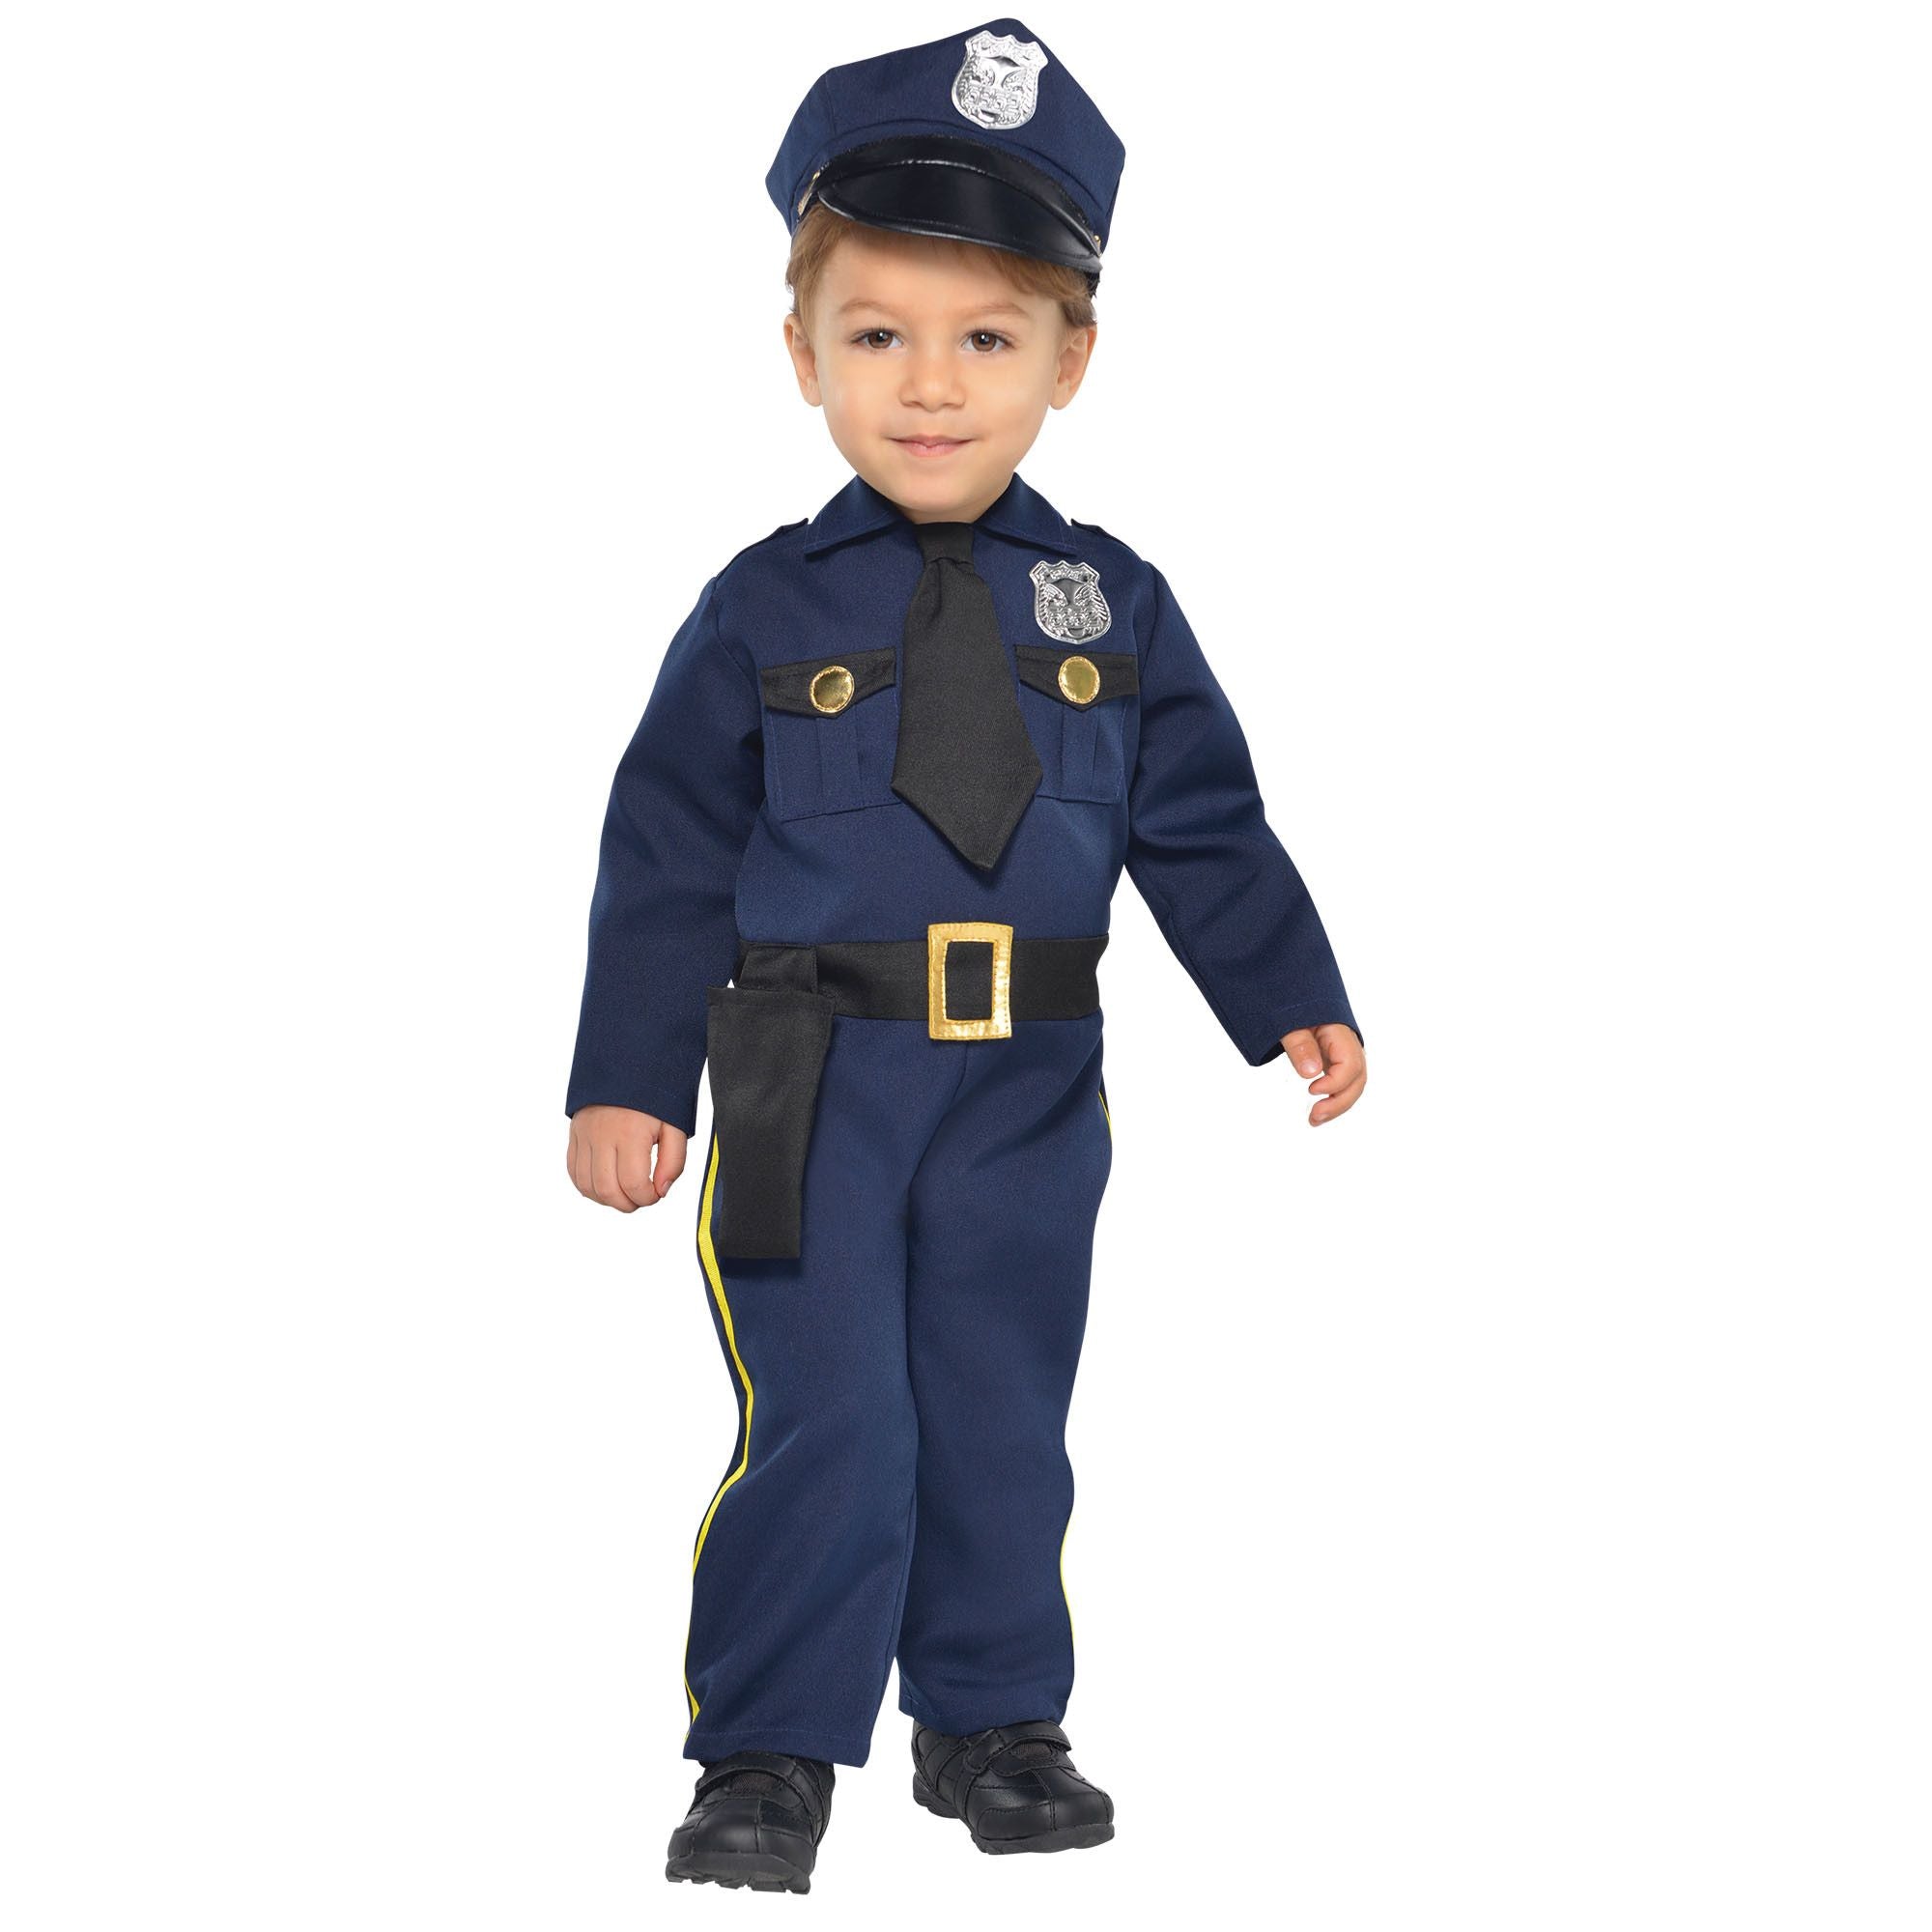 Amscan COSTUMES 3-6 Months Cop Recruit Costume